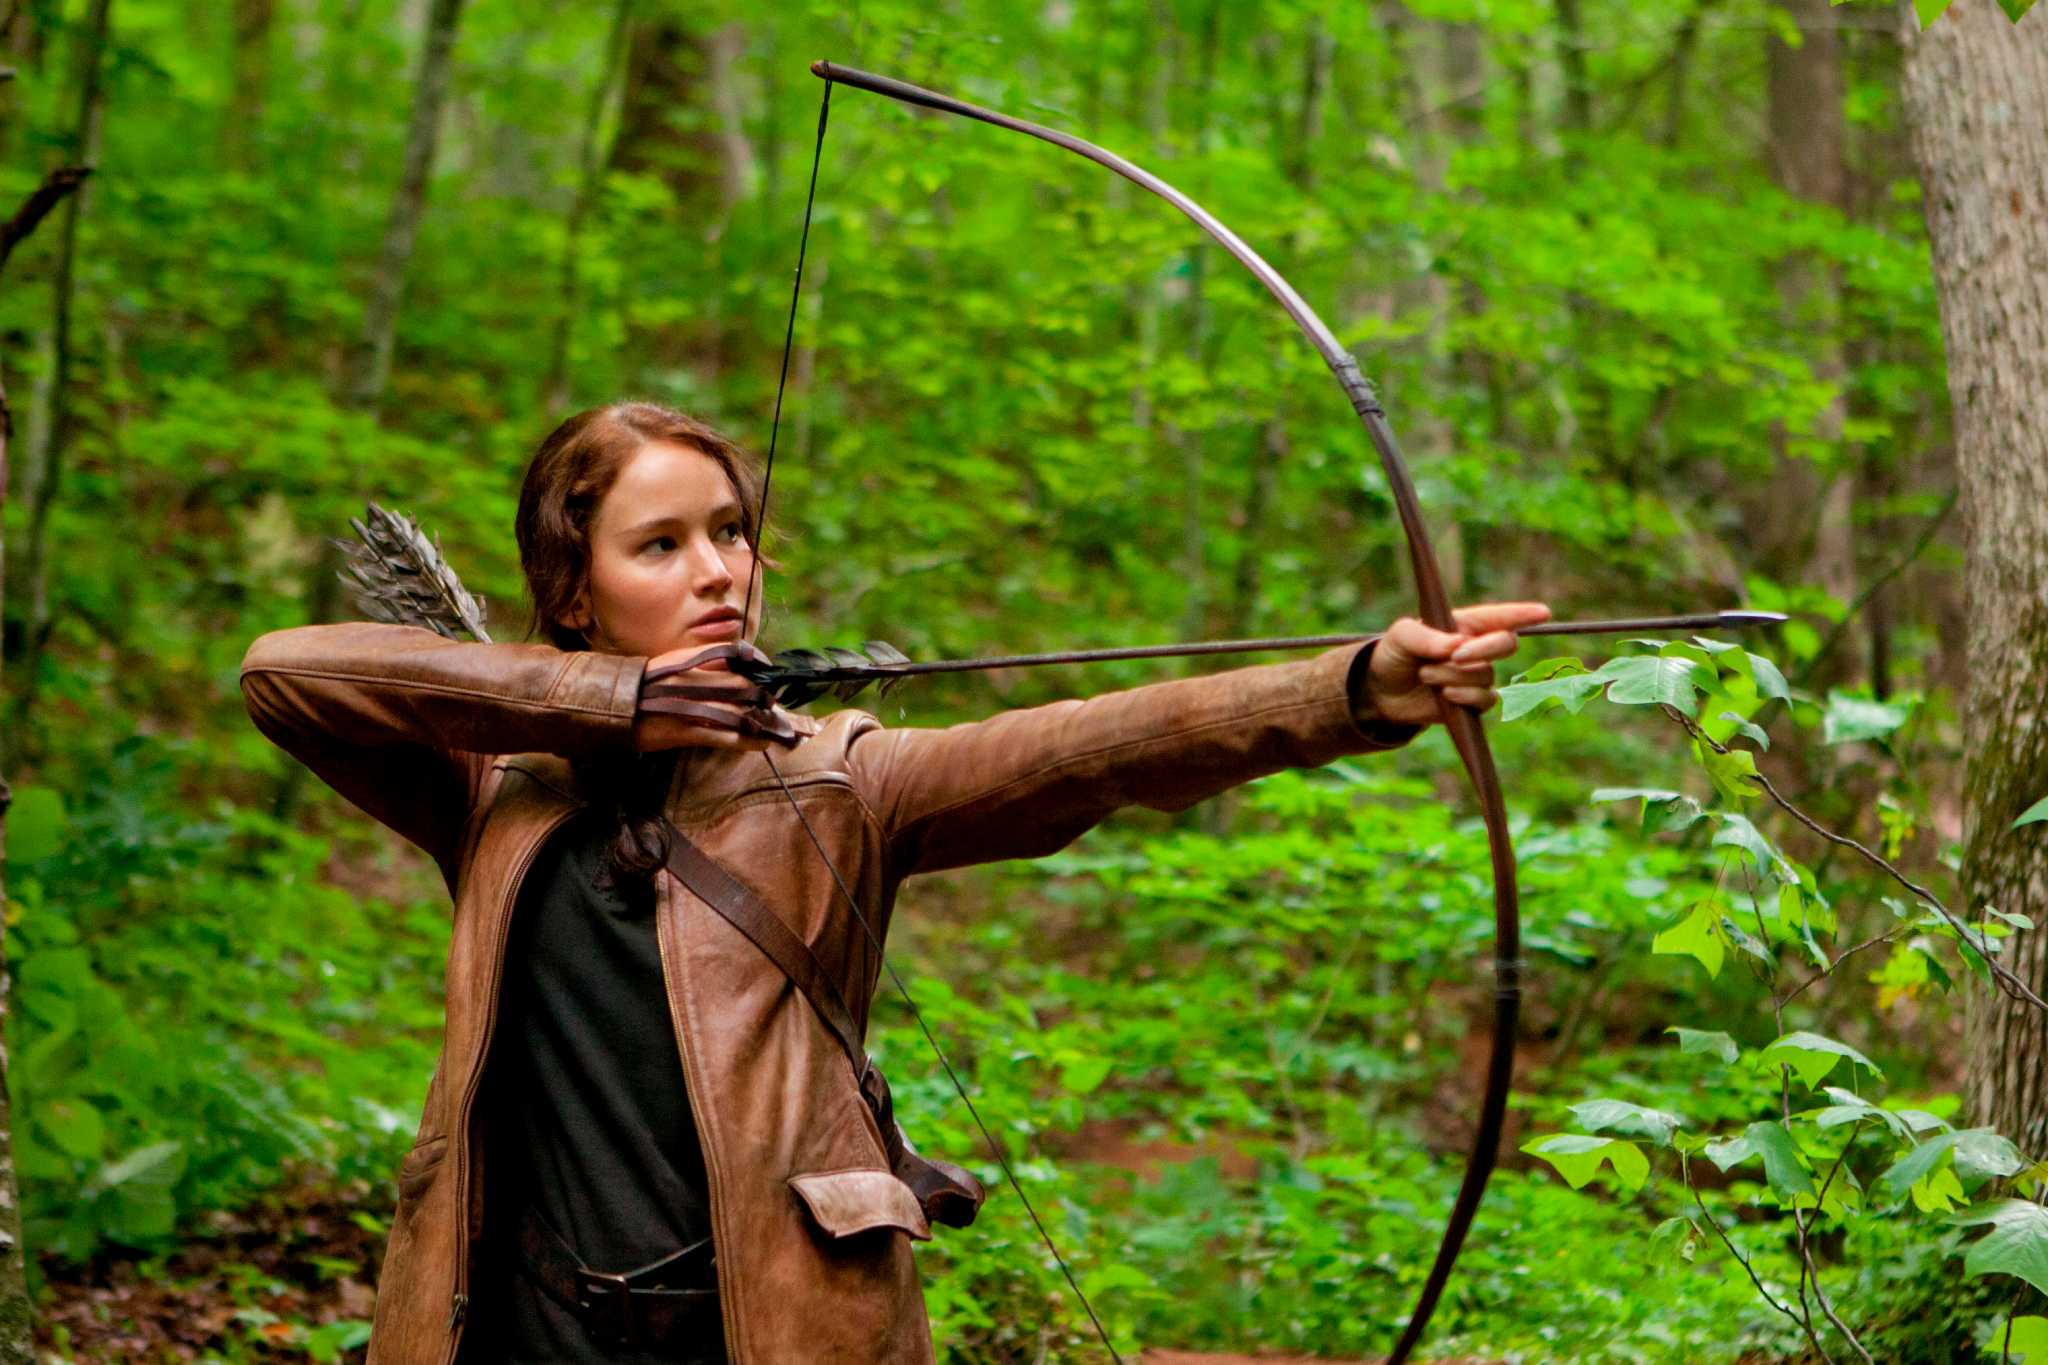 Would Katniss Everdeen have what it takes to hunt zombies? 